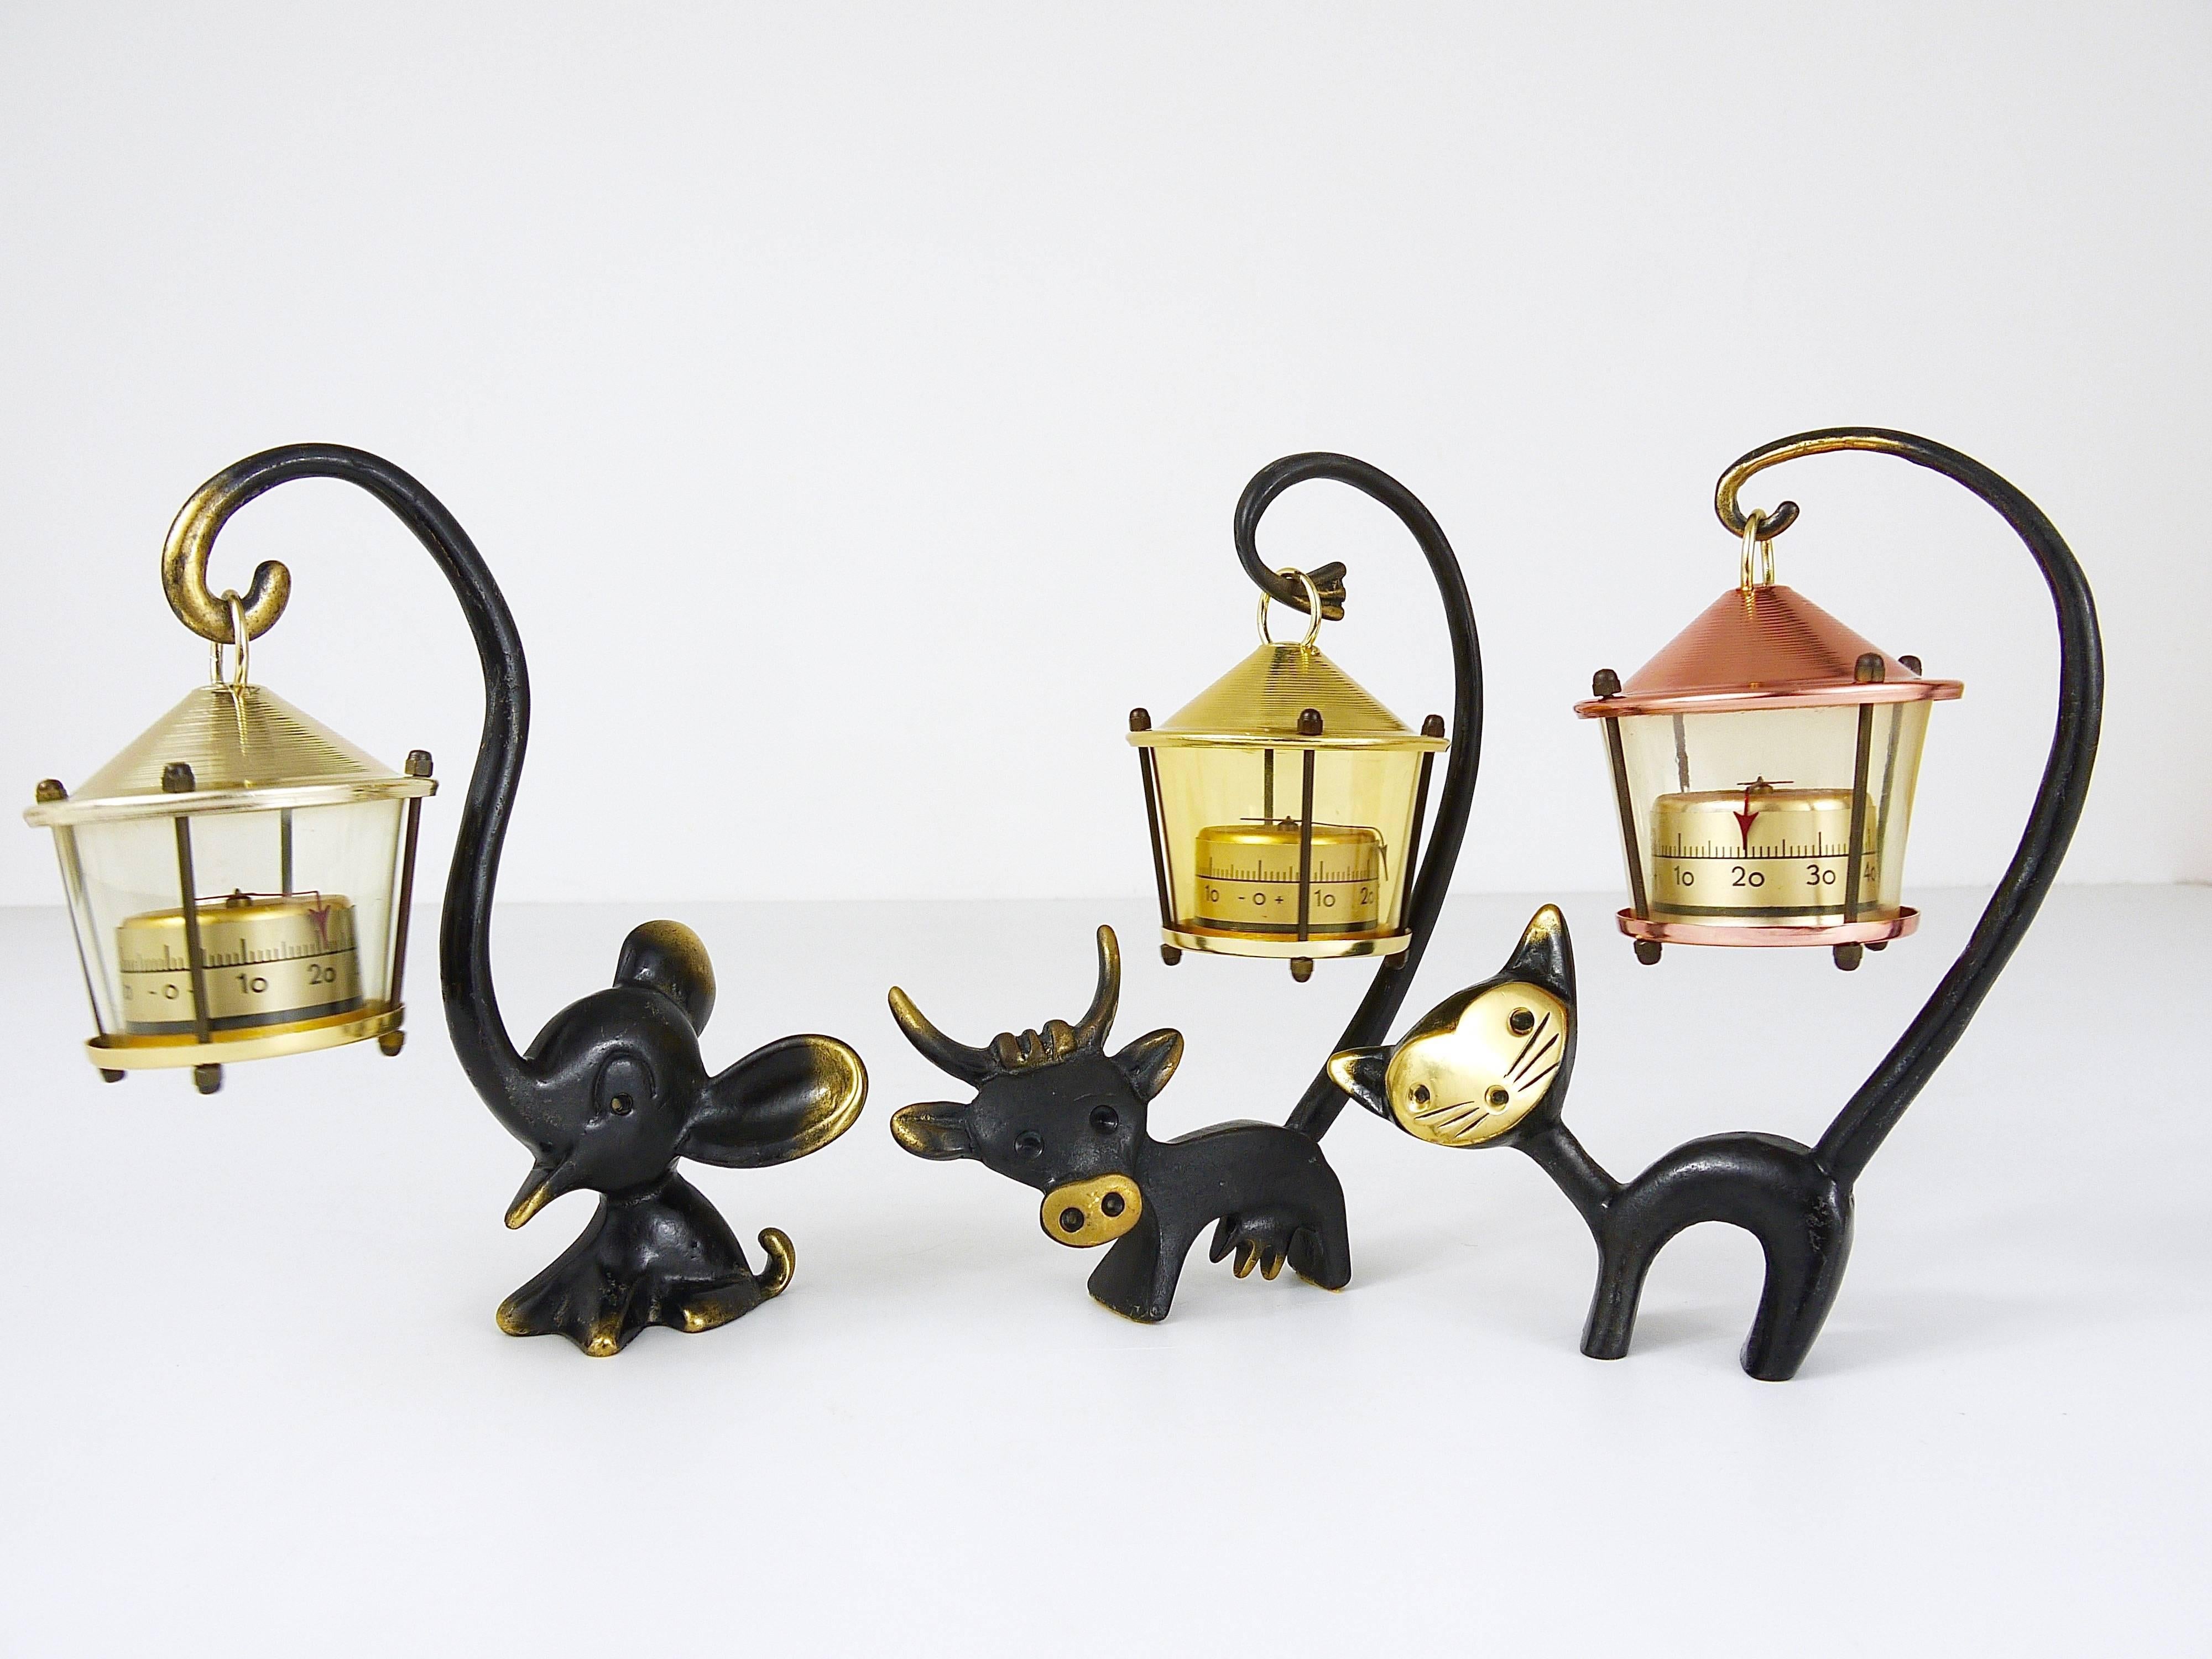 A very charming Austrian Mid-Century desk thermometer, consisting of a nice cat figurine and a lantern-shaped thermometer. A very humorous design by Walter Bosse, executed by Hertha Baller Austria in the 1950s. Made of brass, in very good condition,